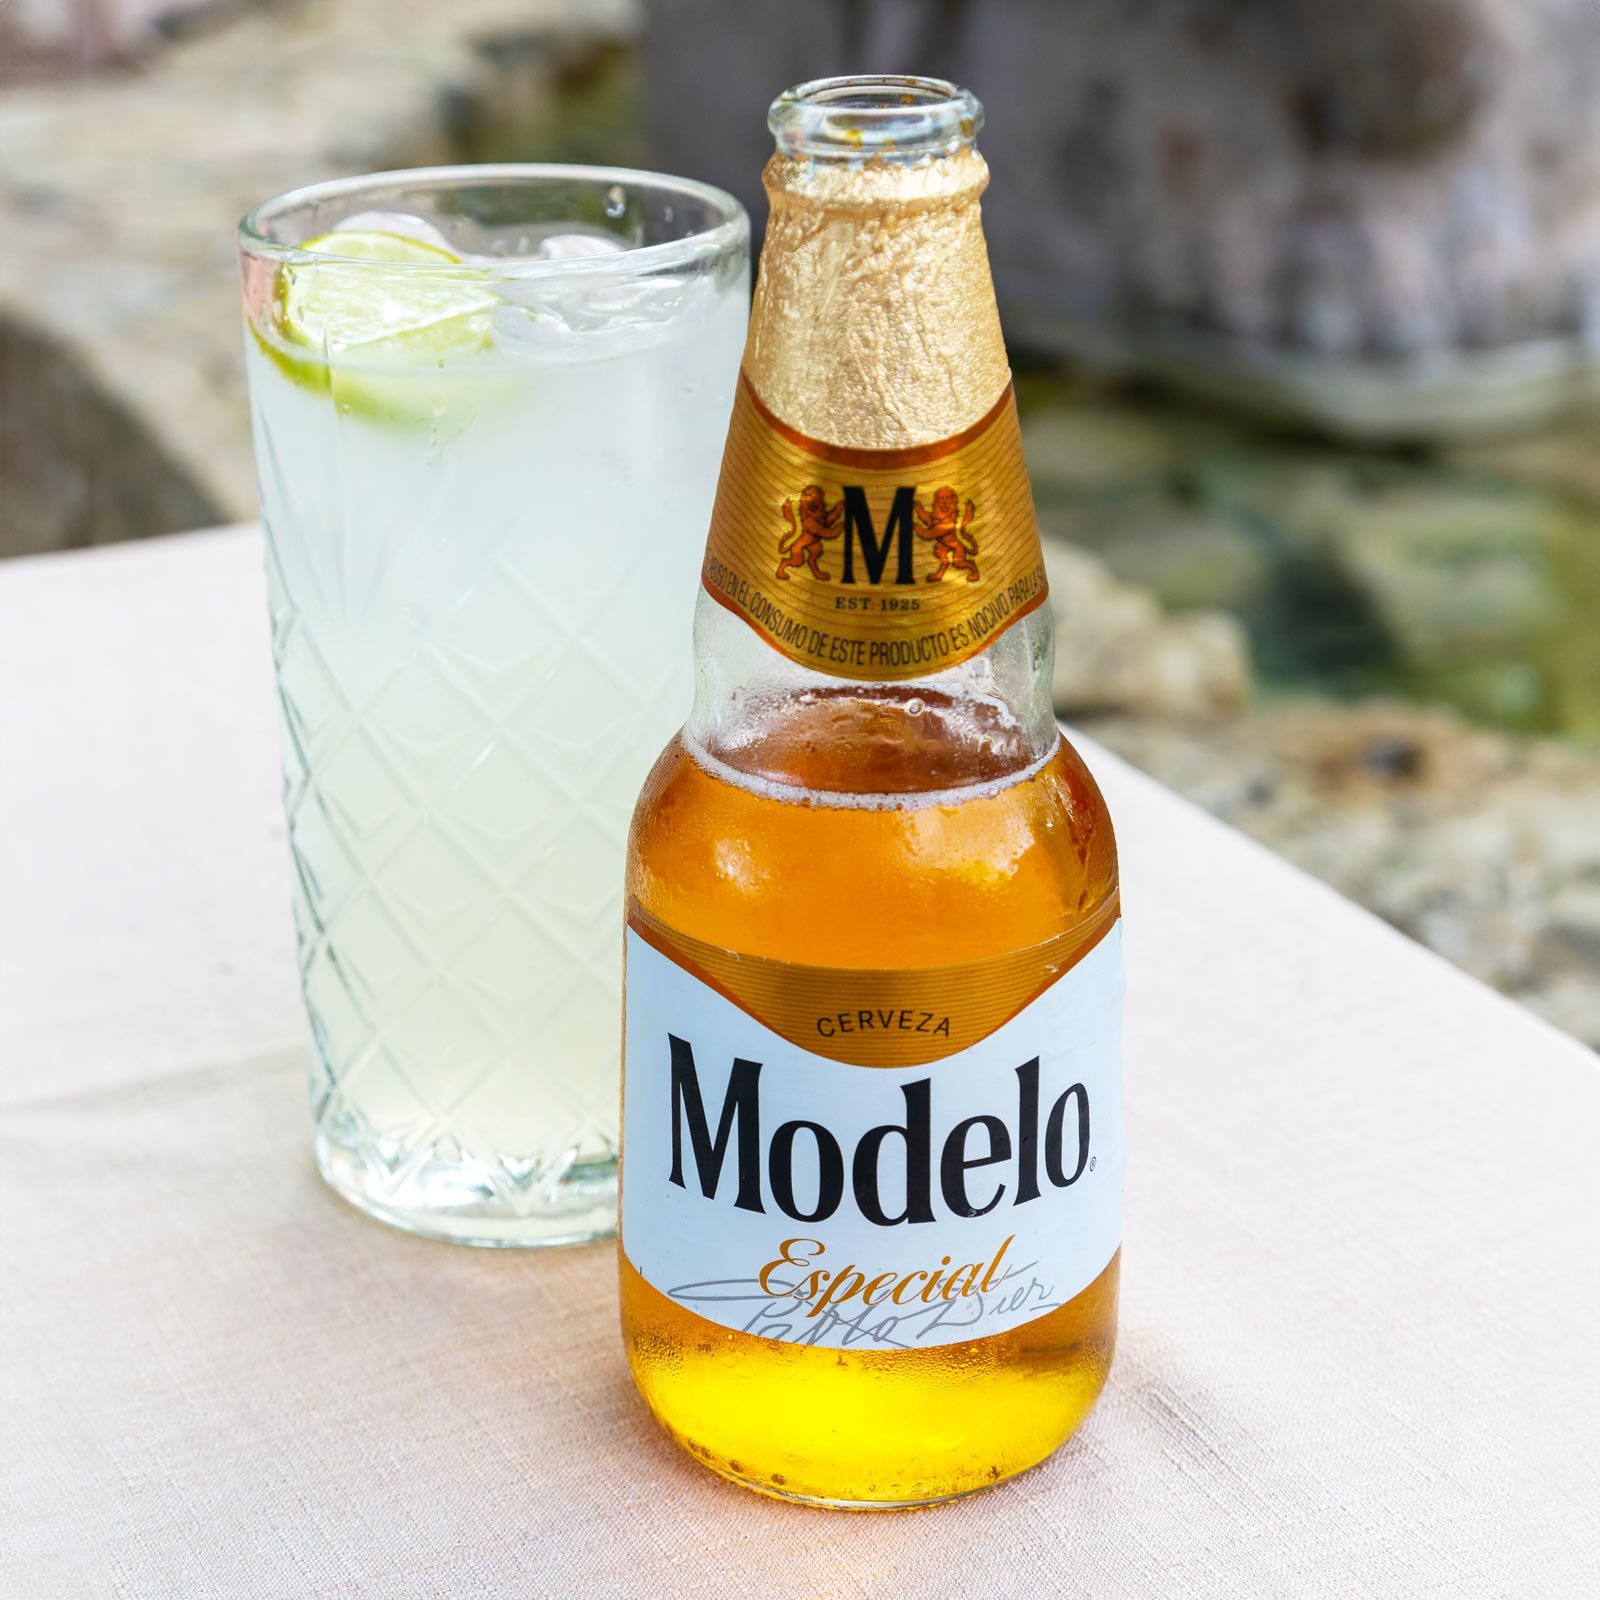 Bottle of Modelo Especial cerveza beer and Mojito in glass on table, Vallodolid, Yucatan, Mexico